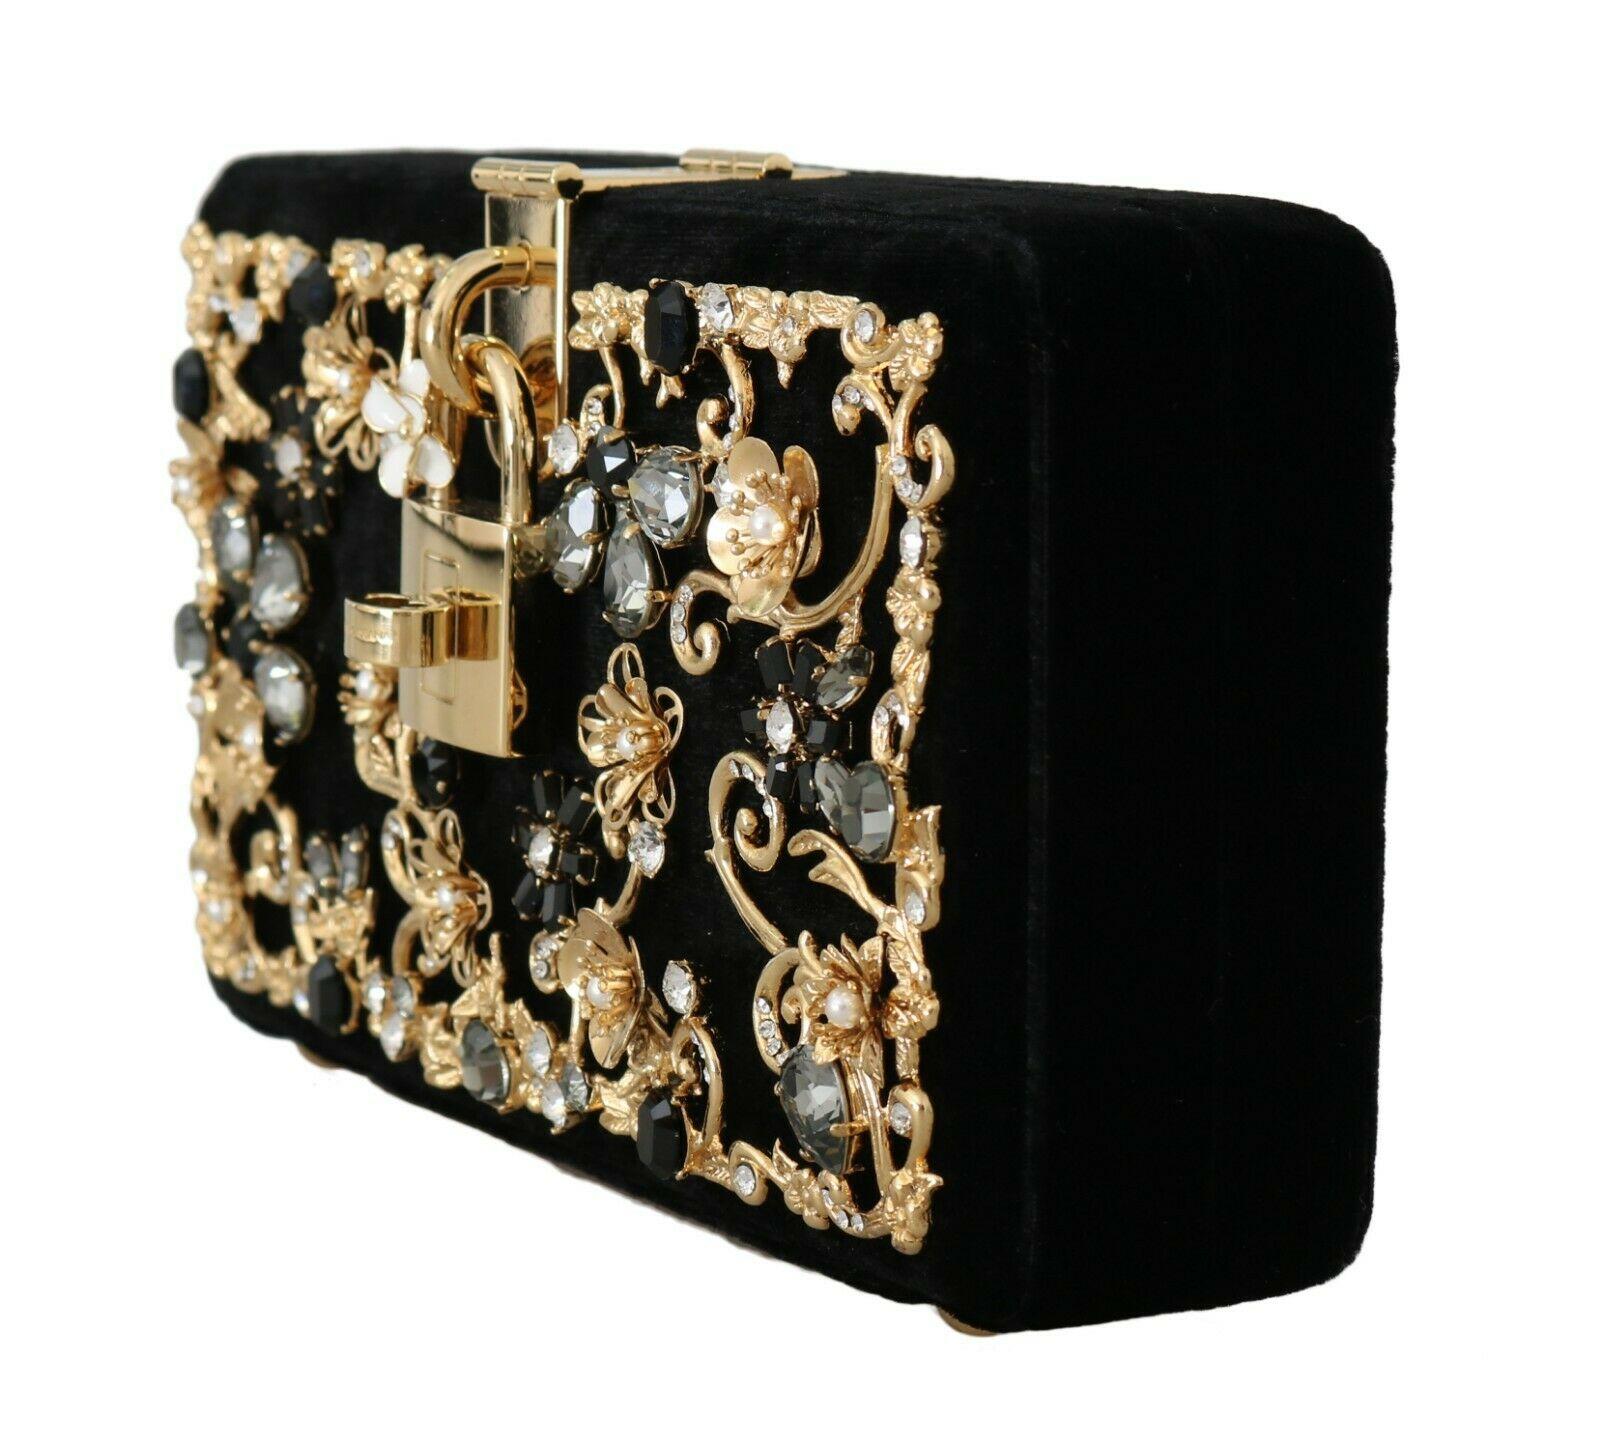  Gorgeous brand new with tags, 100% Authentic Dolce & Gabbana Box Bag.




Model: Evening party clutch purse

Material: 18% Silk, 82% Viscose VELVET


Color: Black, gold metal detailing.


Crystals: Multicolor

Padlock flap closure
Logo